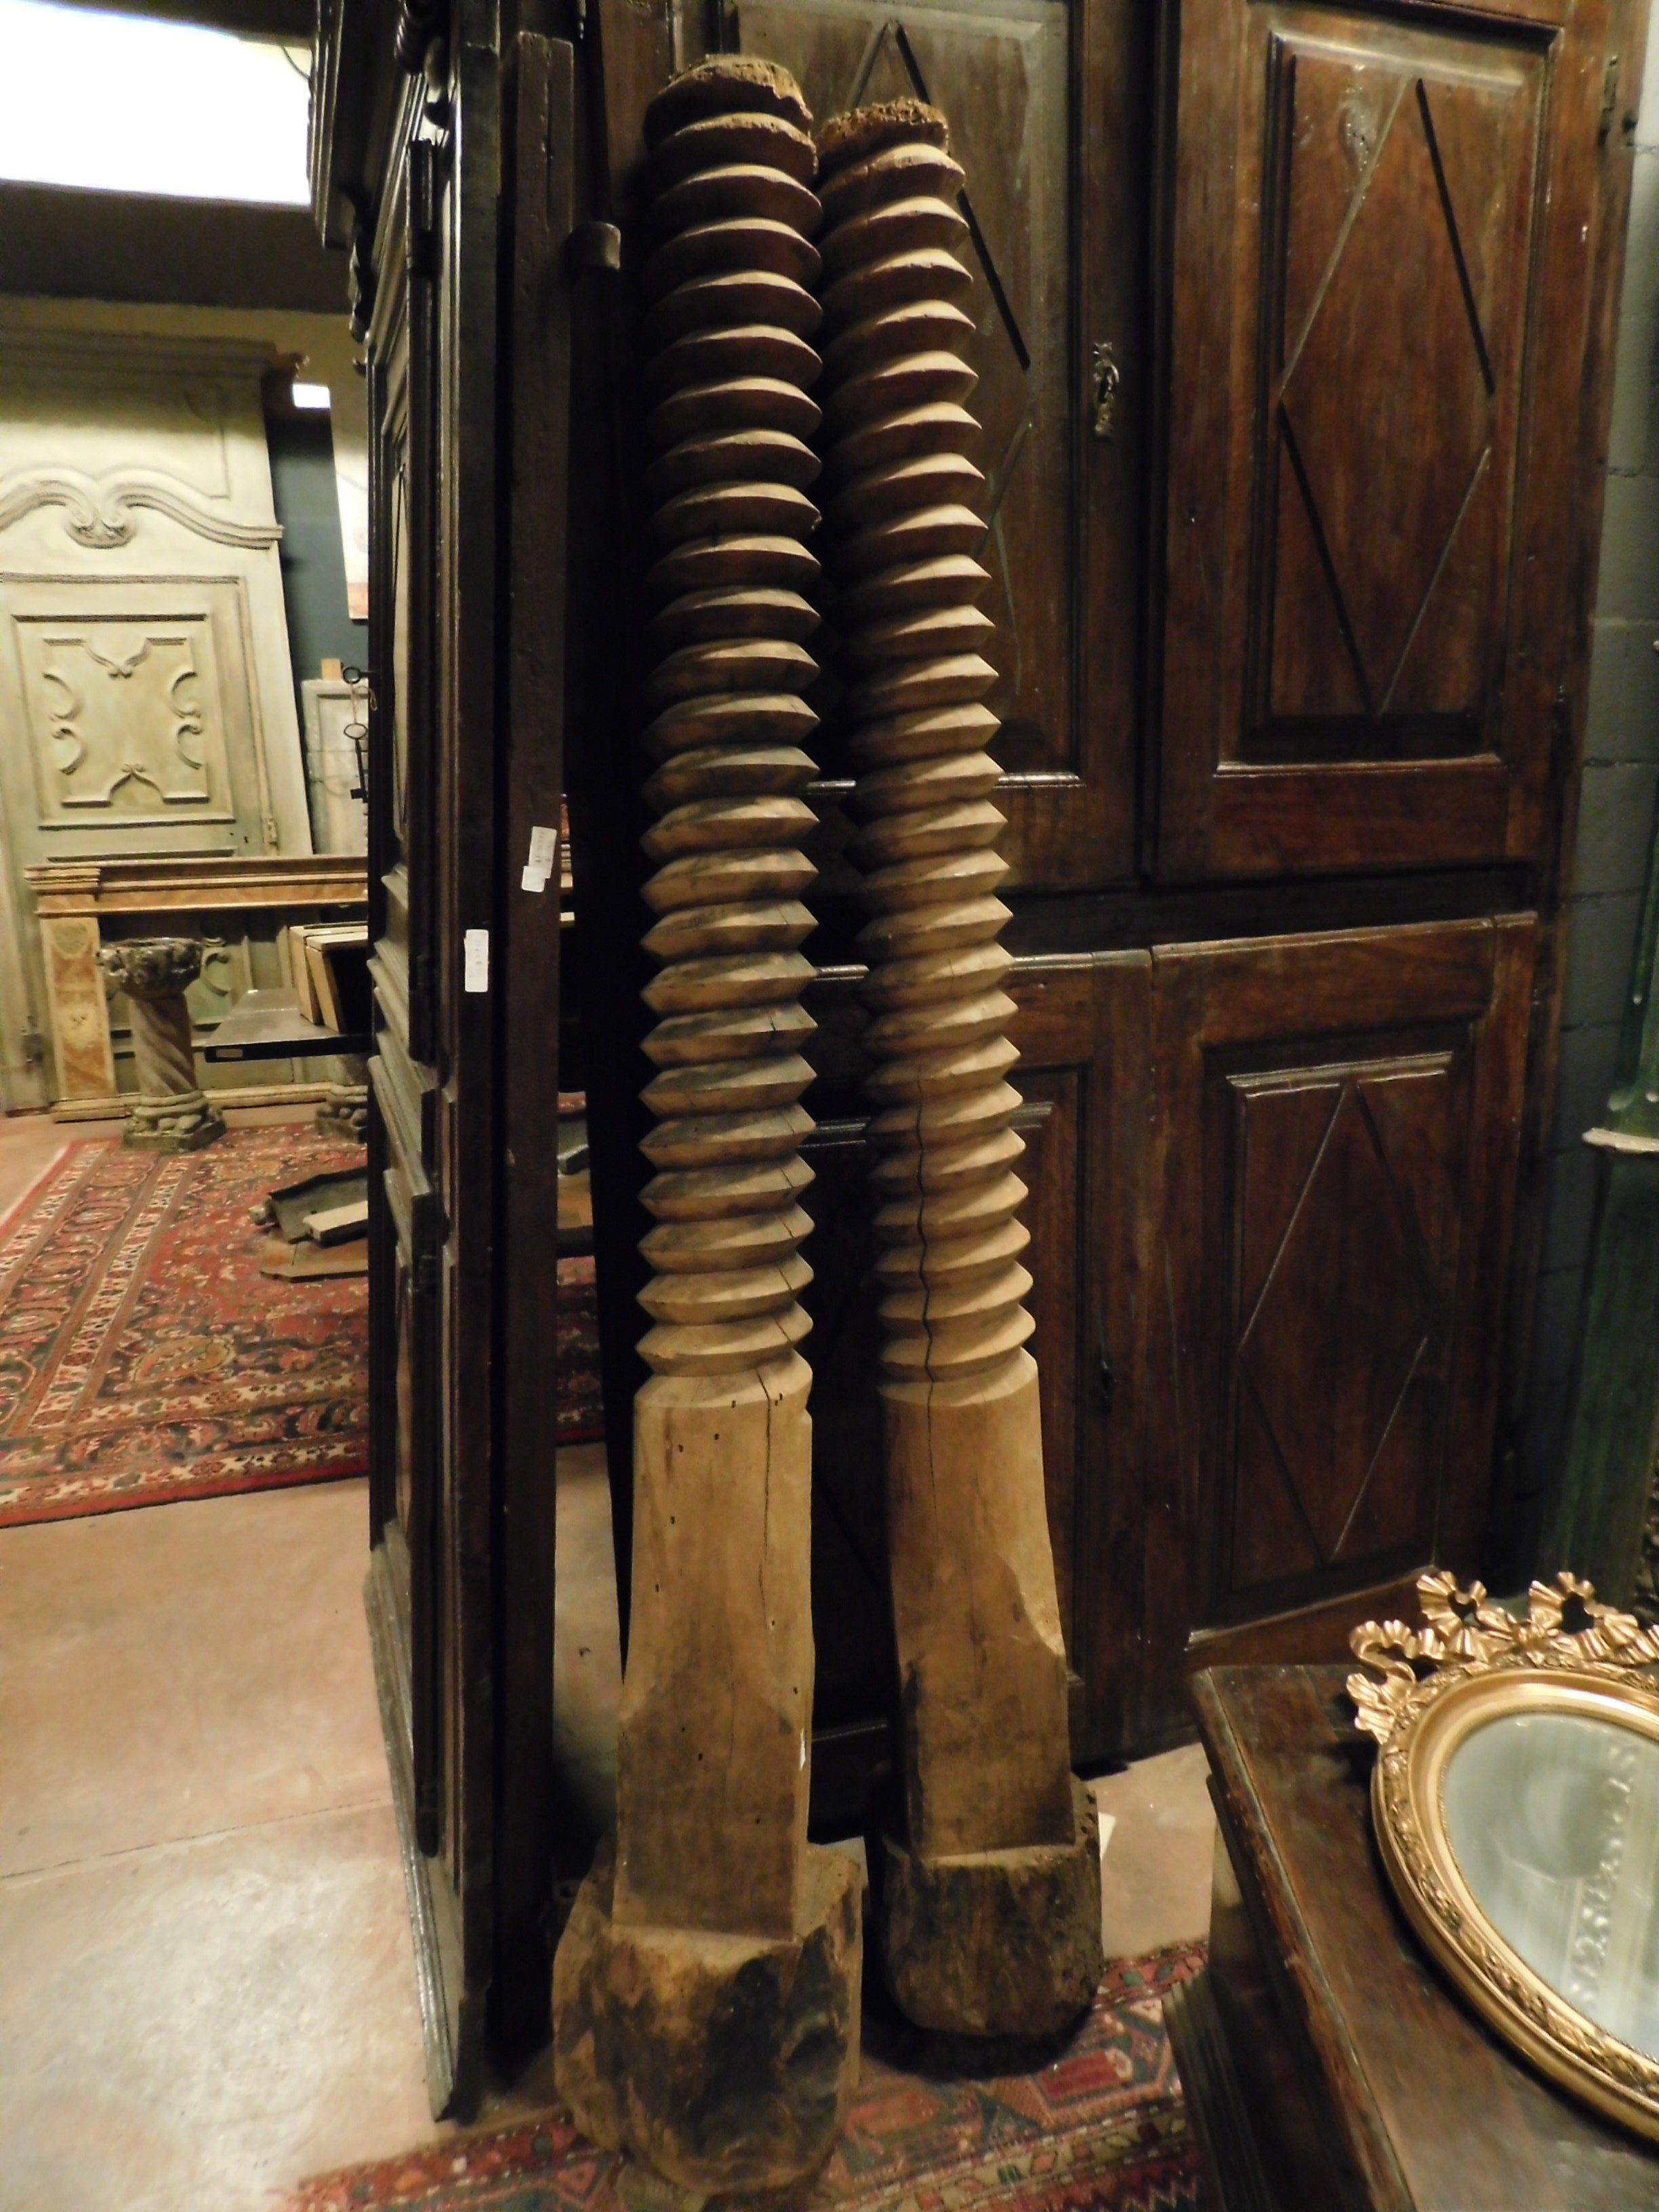 Pair of grape press elements, made of light wood, spiral shape, ideal as decoration in corners of the house, in a wine industry, wine bar, or stimulating the creativity of architects (they may have ornaments, beds, columns, ... built in the 1900s in